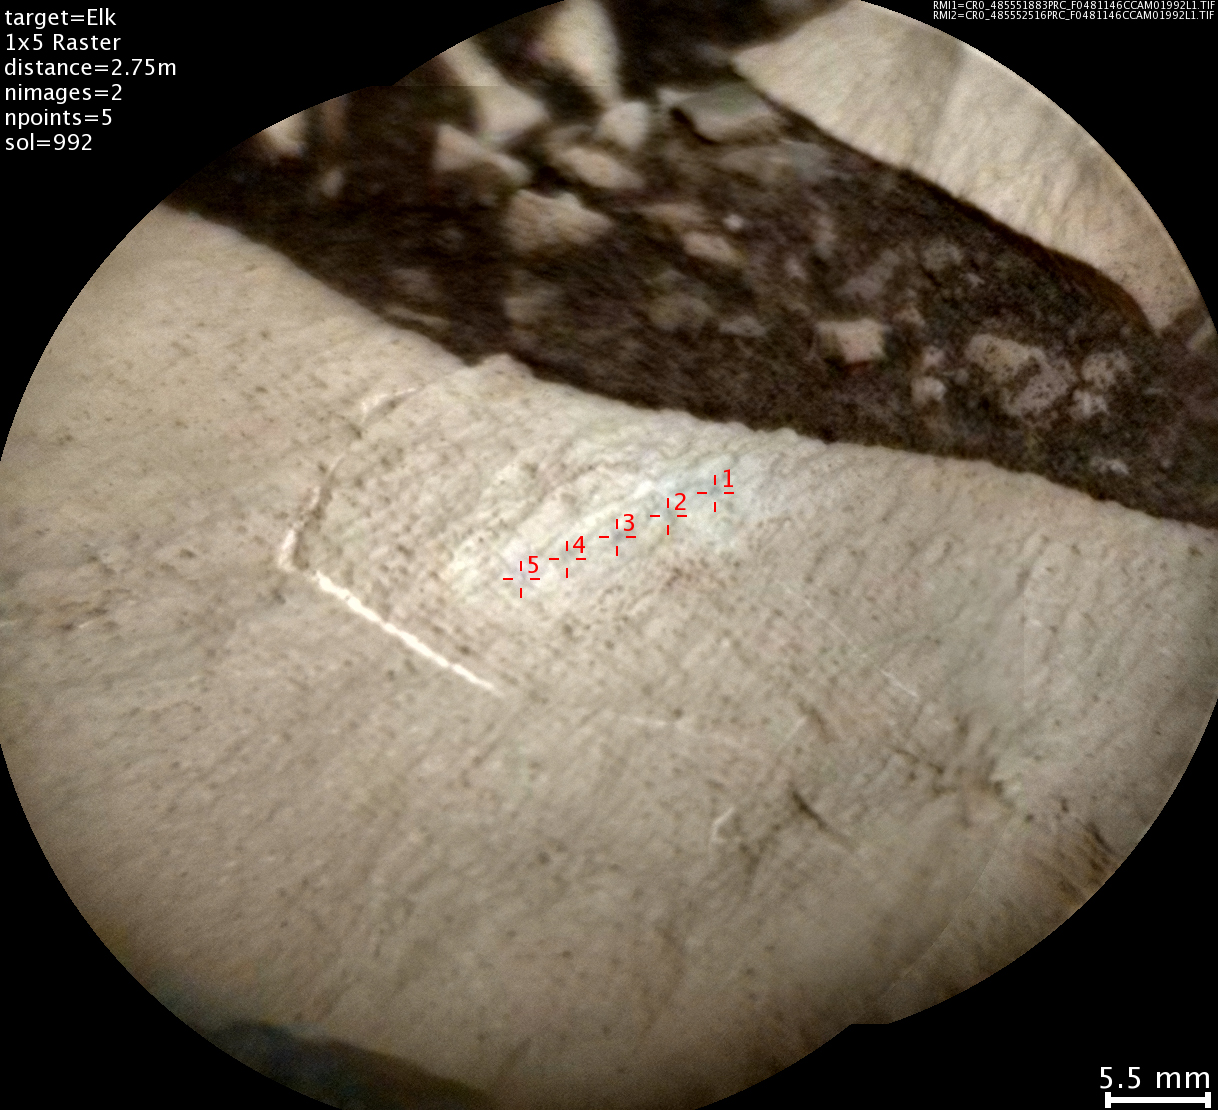 This image from the Chemistry and Camera (ChemCam) instrument on NASA's Curiosity Mars rover shows detailed texture of a rock target called "Elk" on Mars' Mount Sharp, revealing laminations that are present in much of the Murray Formation geological unit of lower Mount Sharp.